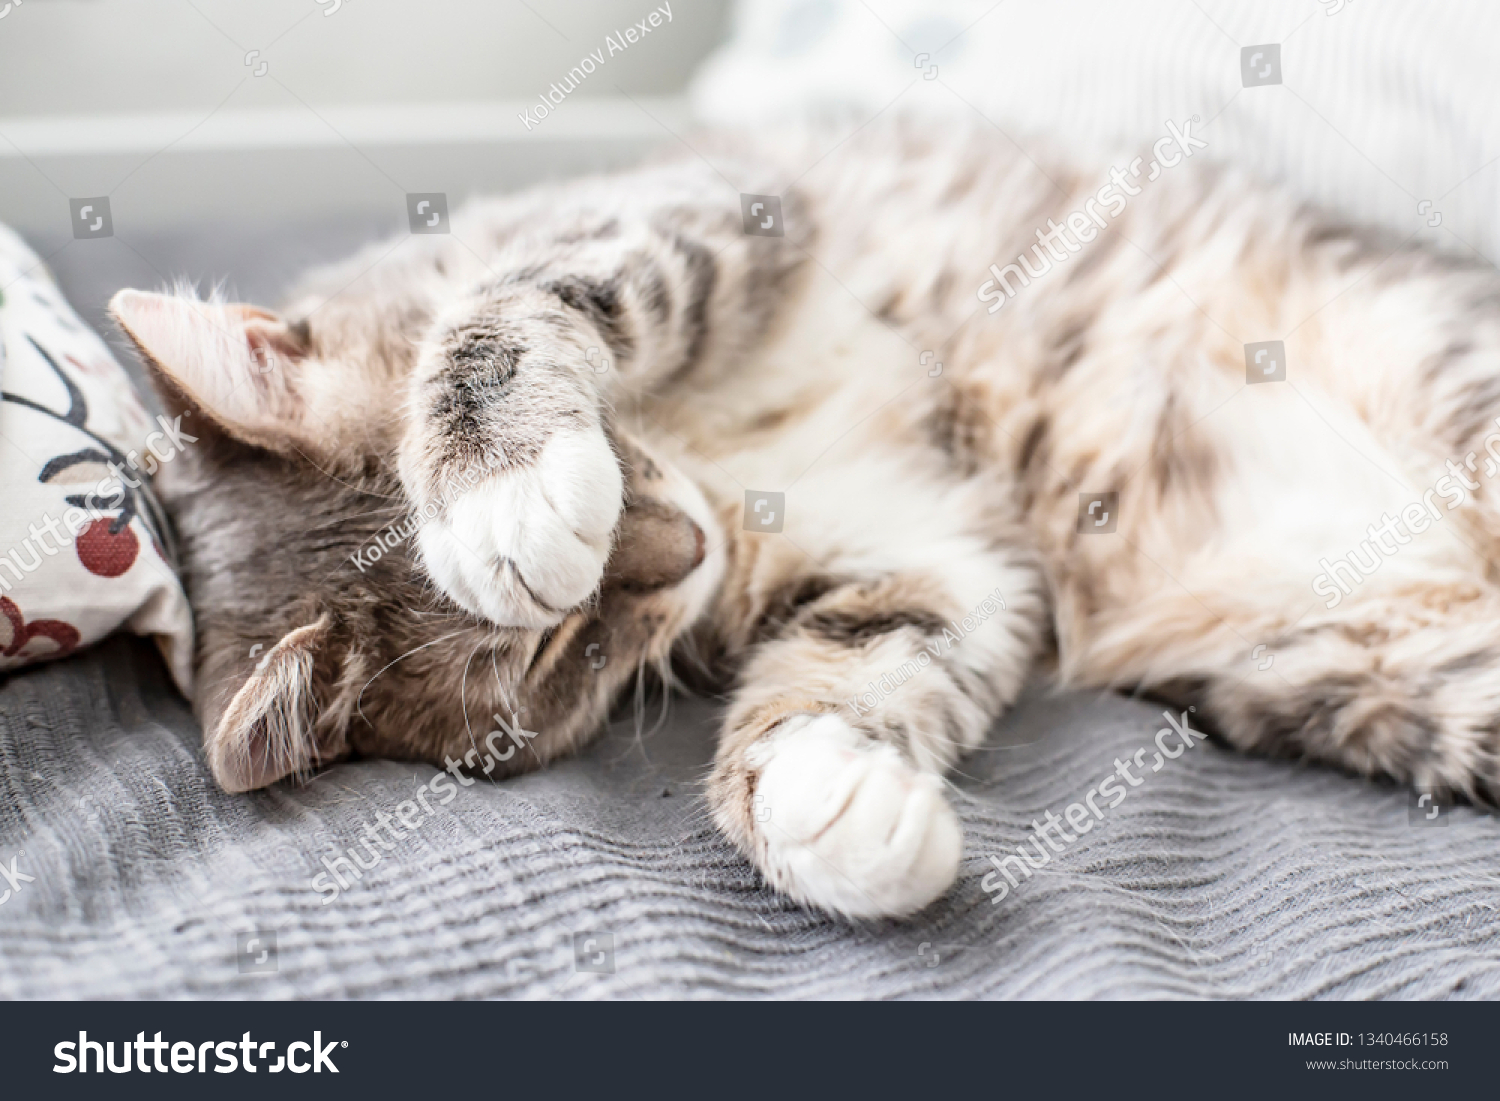 Young, cute cat sleeps on the bed and closes its eyes with its paw from the daylight that comes from the window. Close-up. #1340466158